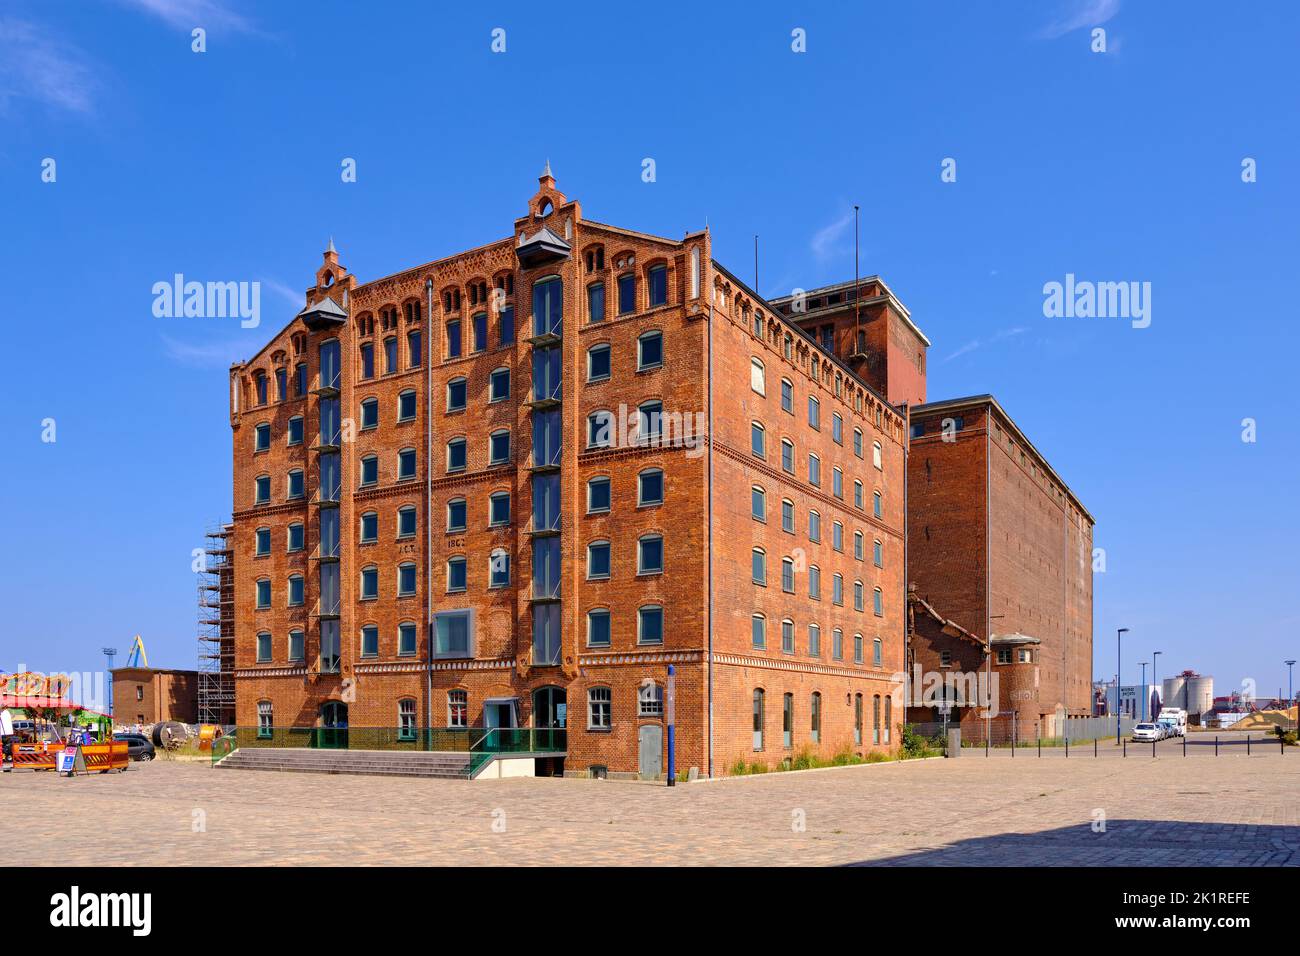 Everyday and tourist scene and townscape in the Old Harbour in front of an historic warehouse building, Wismar, Germany. Stock Photo